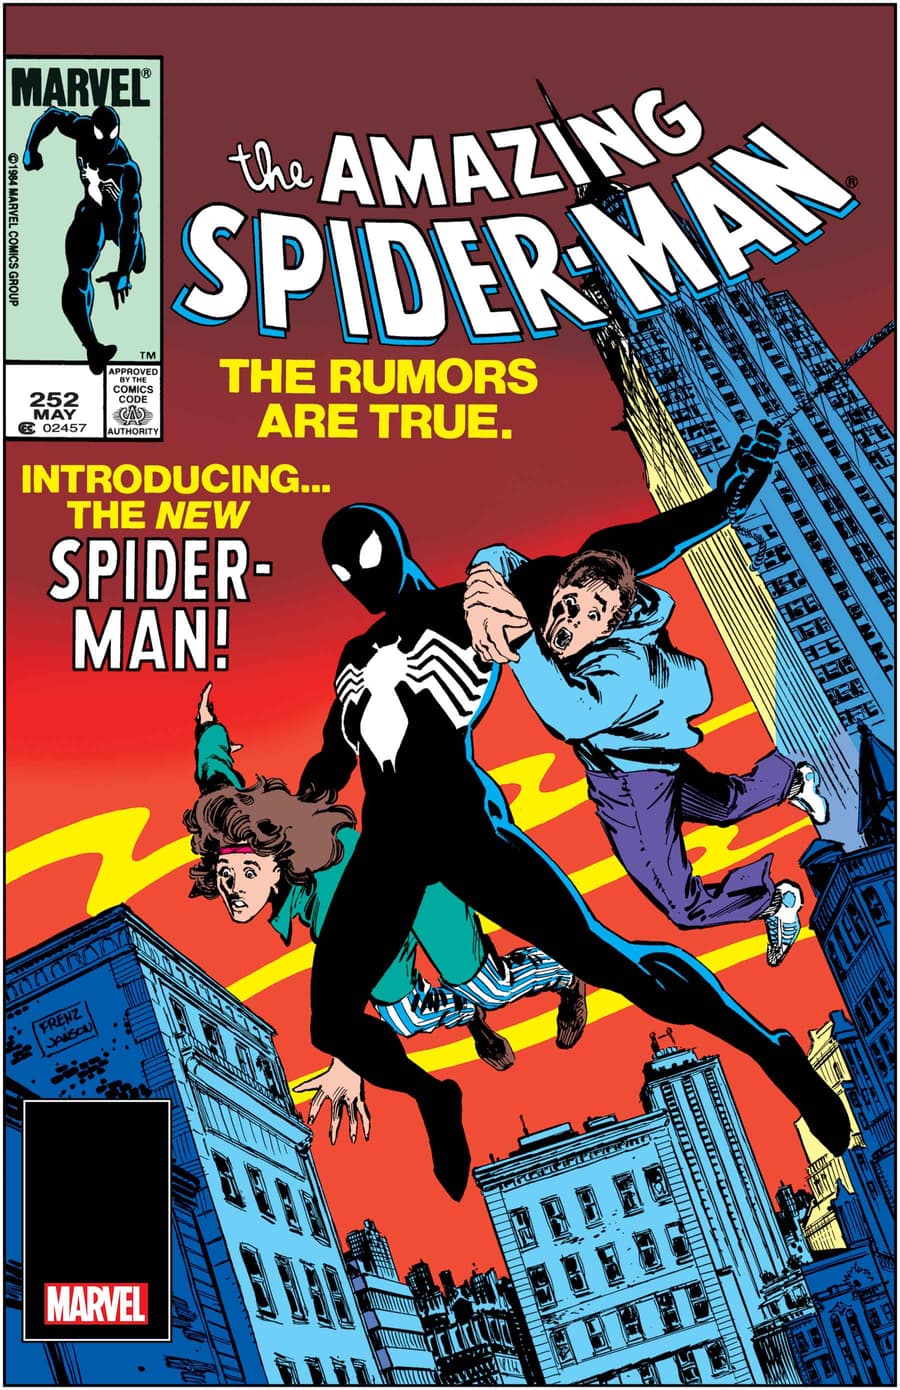 AMAZING SPIDER-MAN #252 FACSIMILE EDITION cover by Ron Frenz